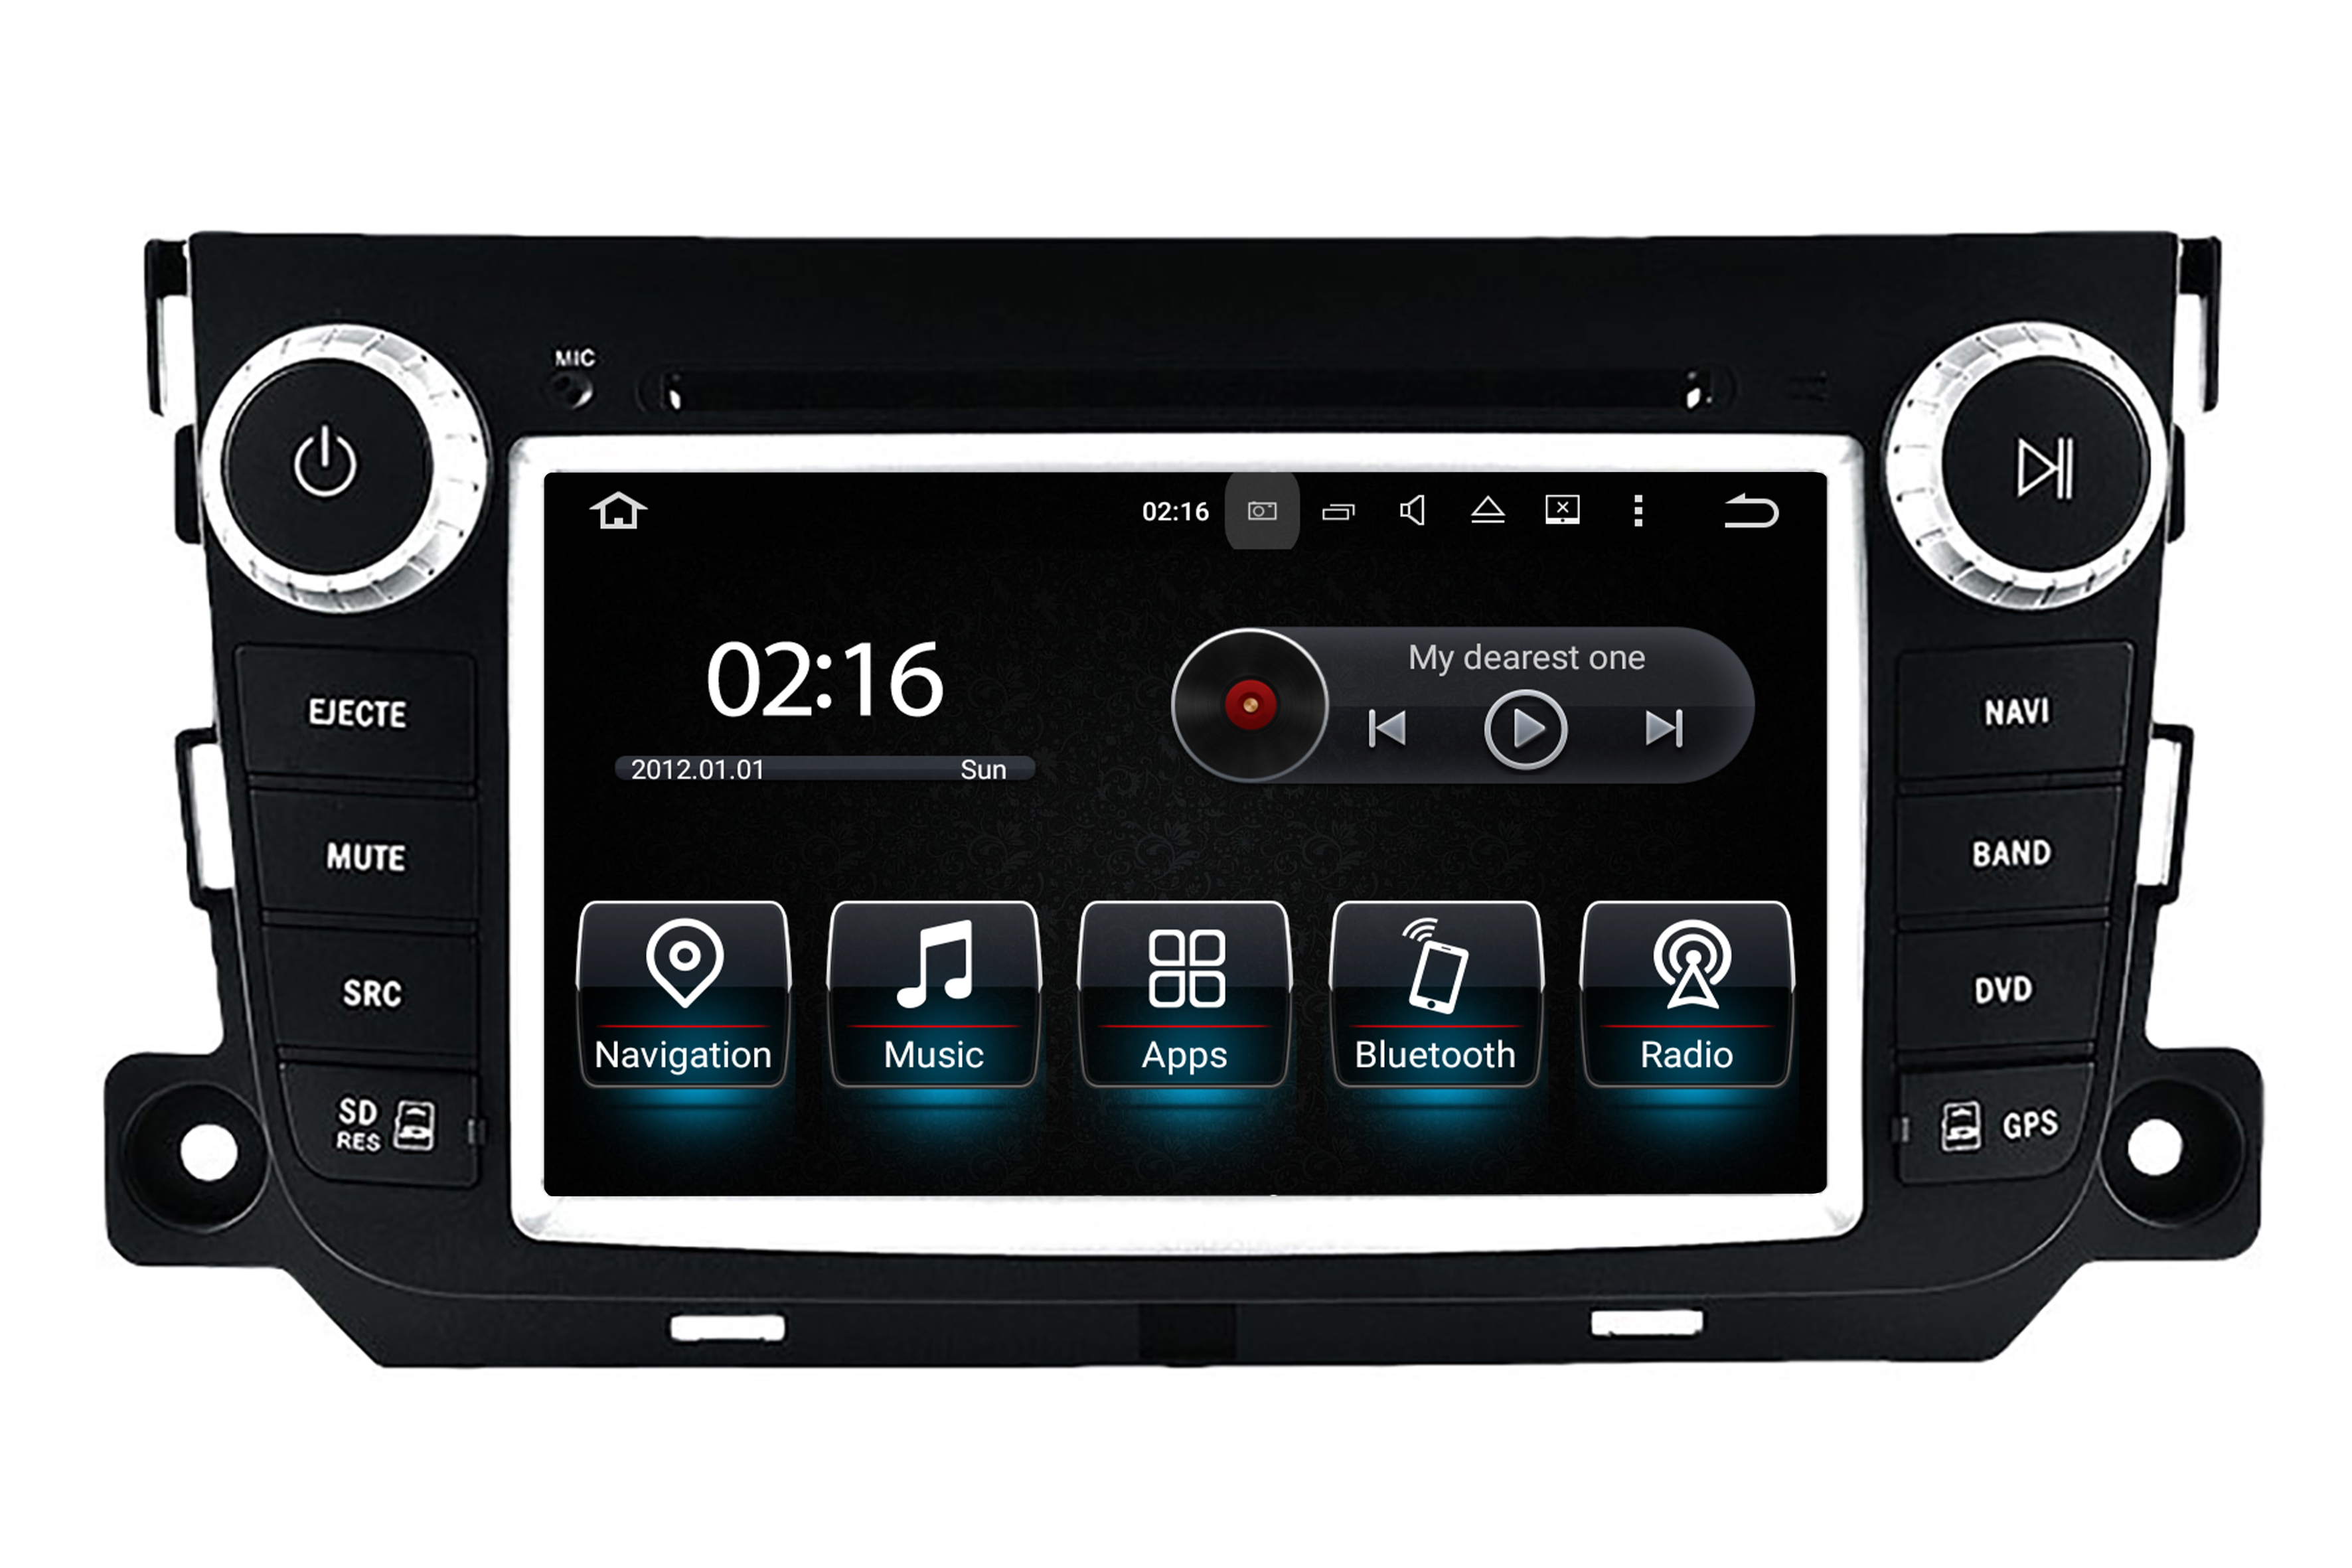  Android Car Radio GPS 7" carplay Smart Fortwo android 10.0 car audio stereo car videos car dvd player